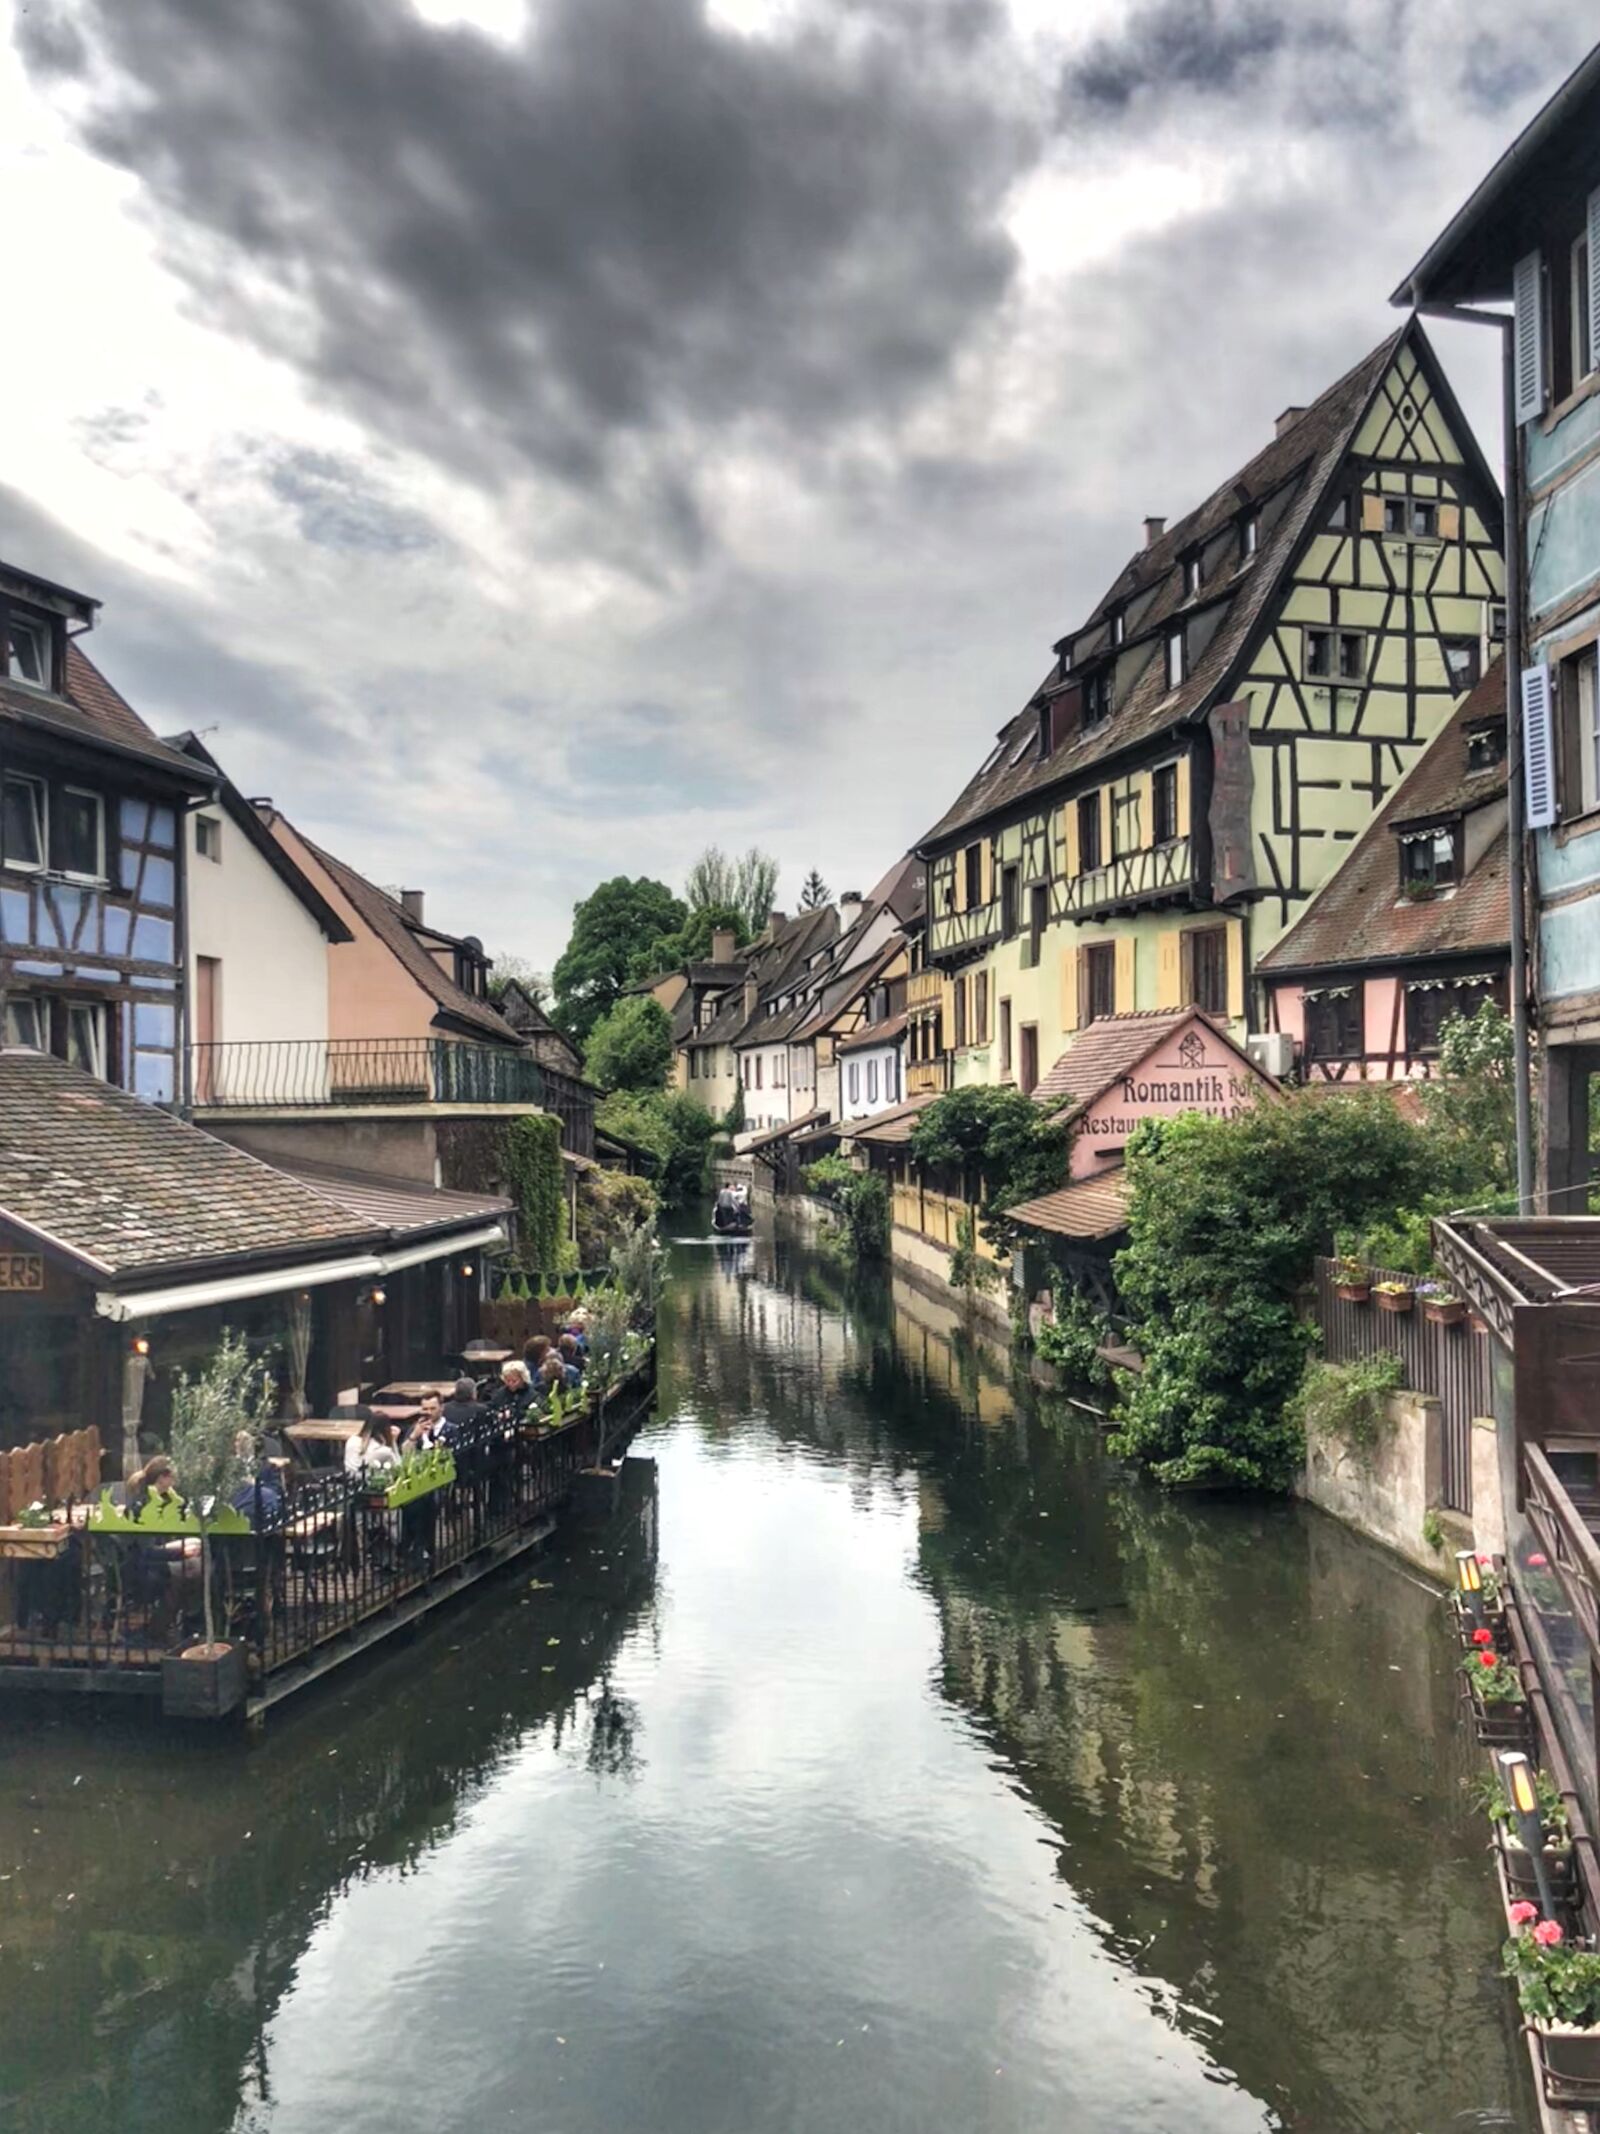 Apple iPhone X + iPhone X back dual camera 4mm f/1.8 sample photo. Colmar, france, alsace photography